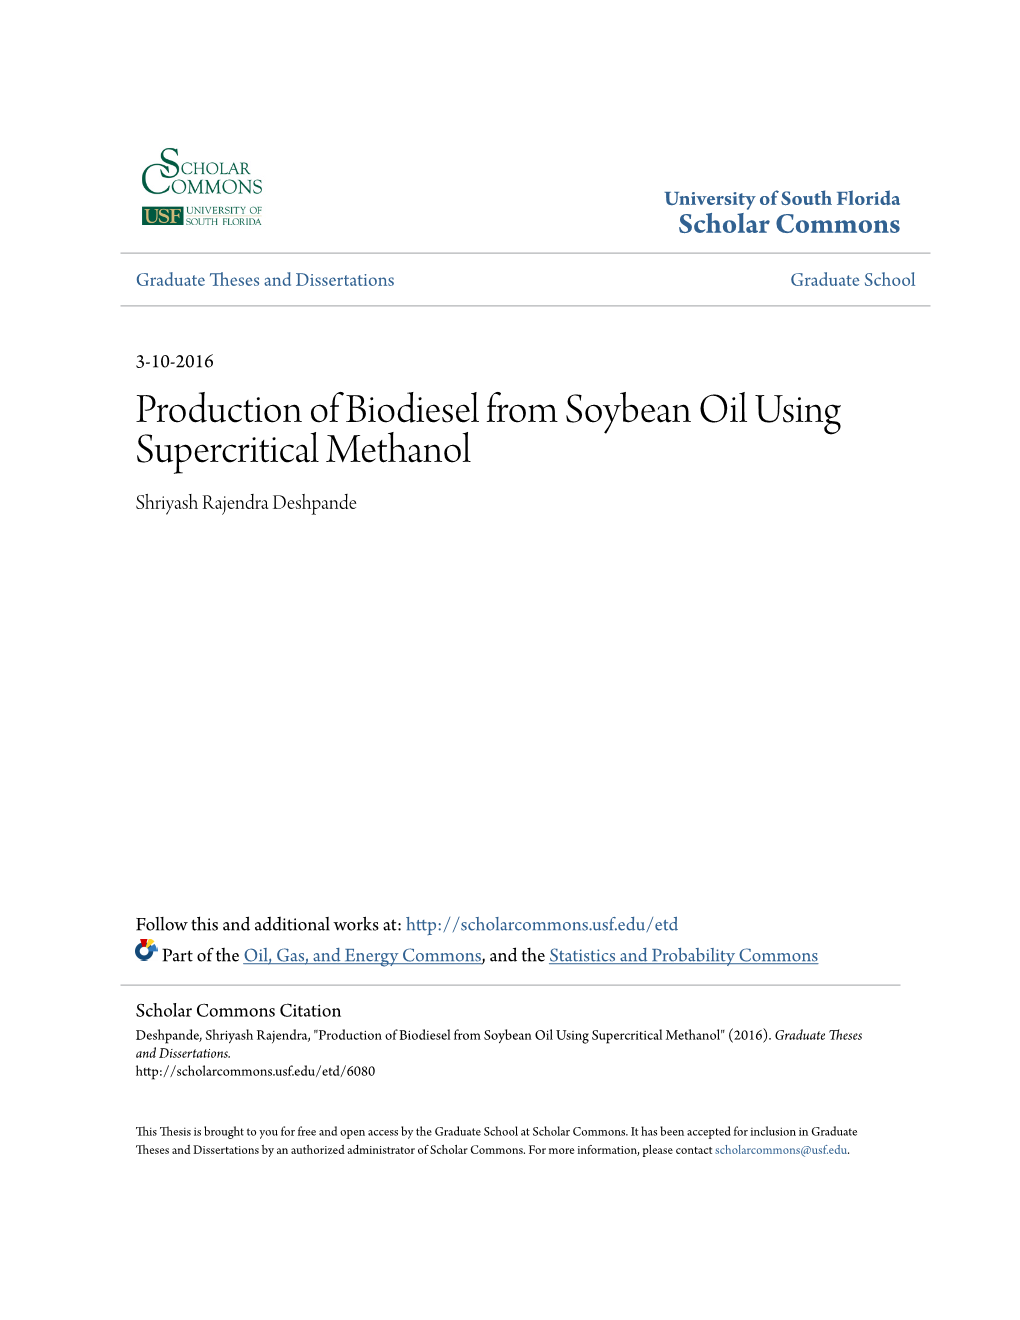 Production of Biodiesel from Soybean Oil Using Supercritical Methanol Shriyash Rajendra Deshpande